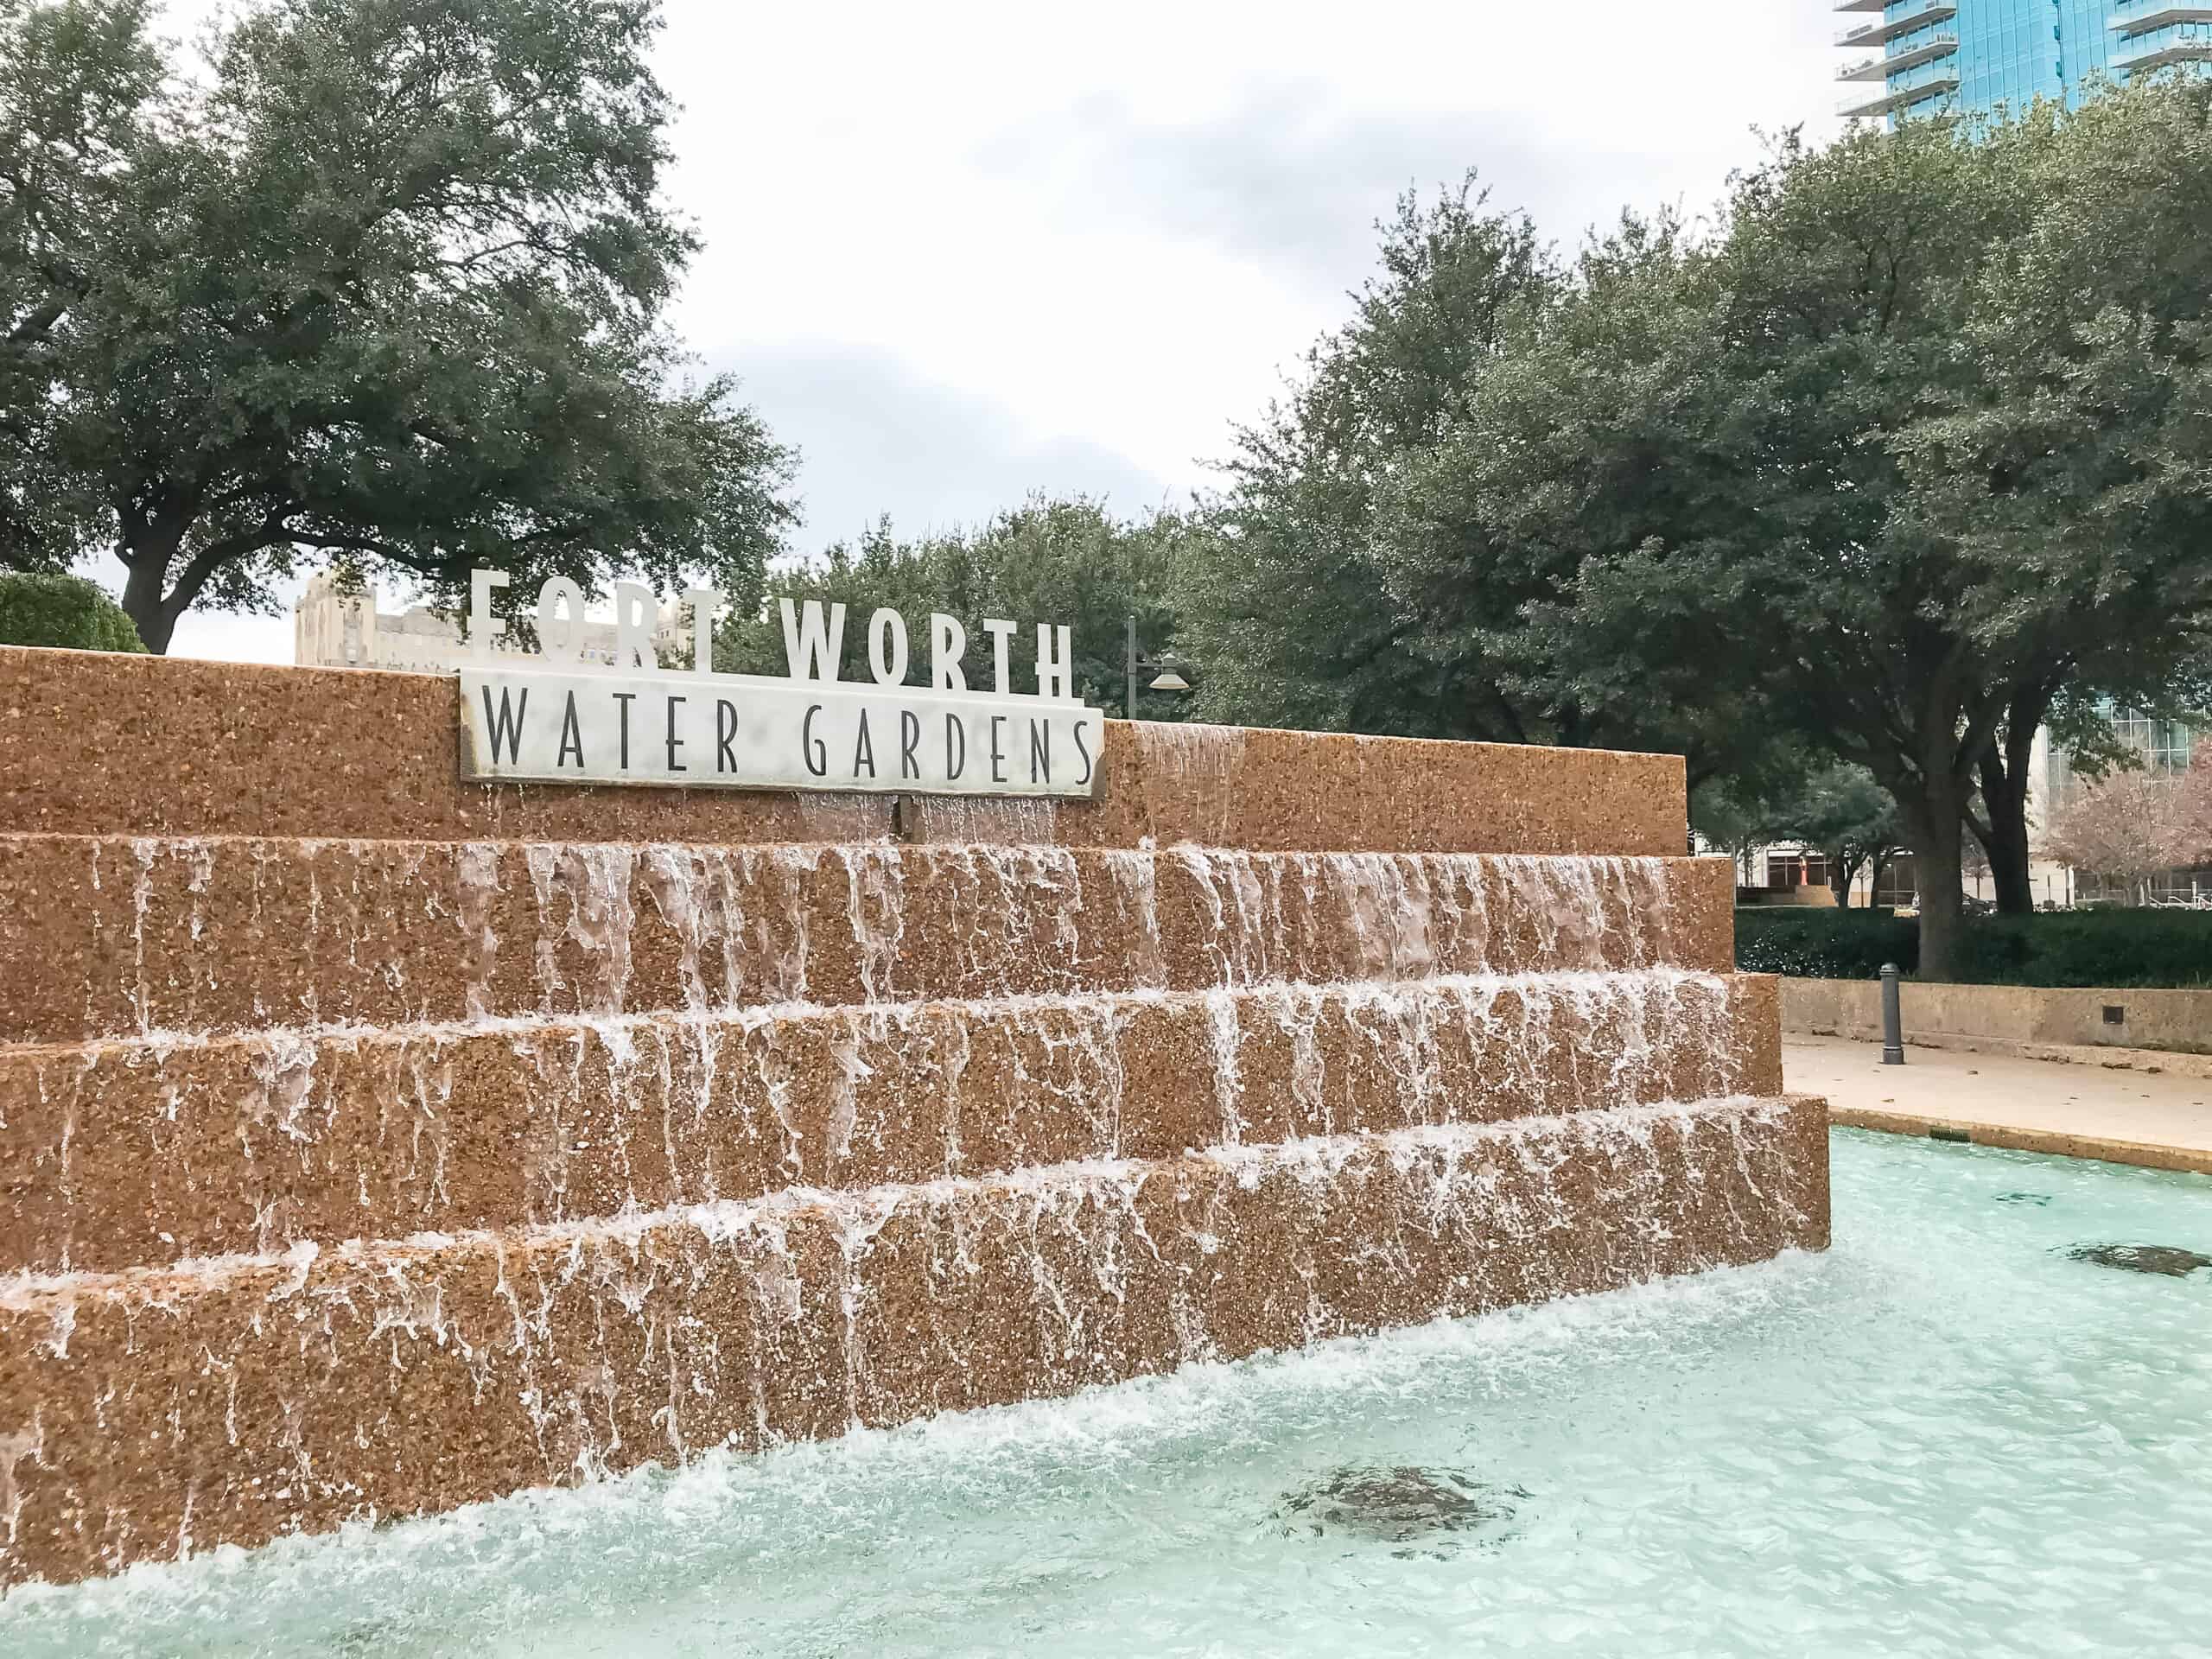 Fort Worth Water Gardens - a great day trip from Dallas idea